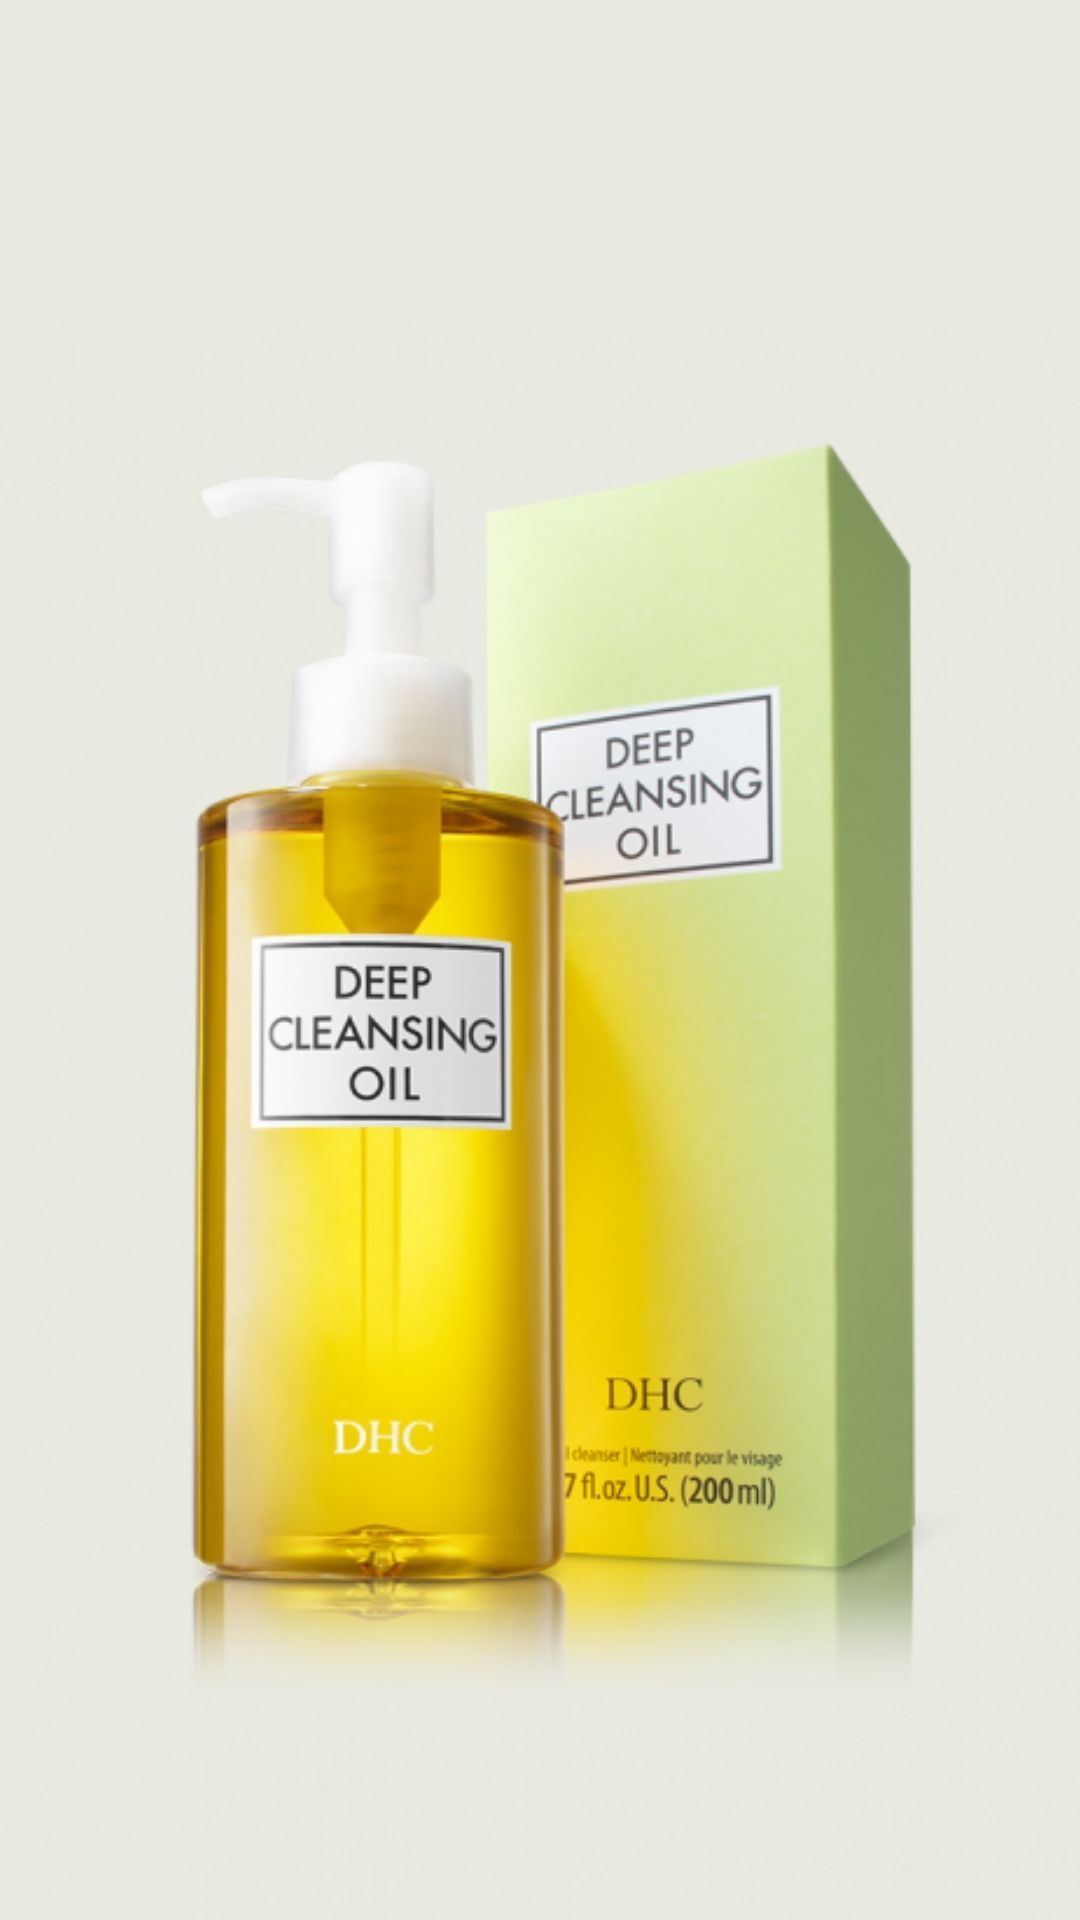 DHS Deep Cleansing Oil